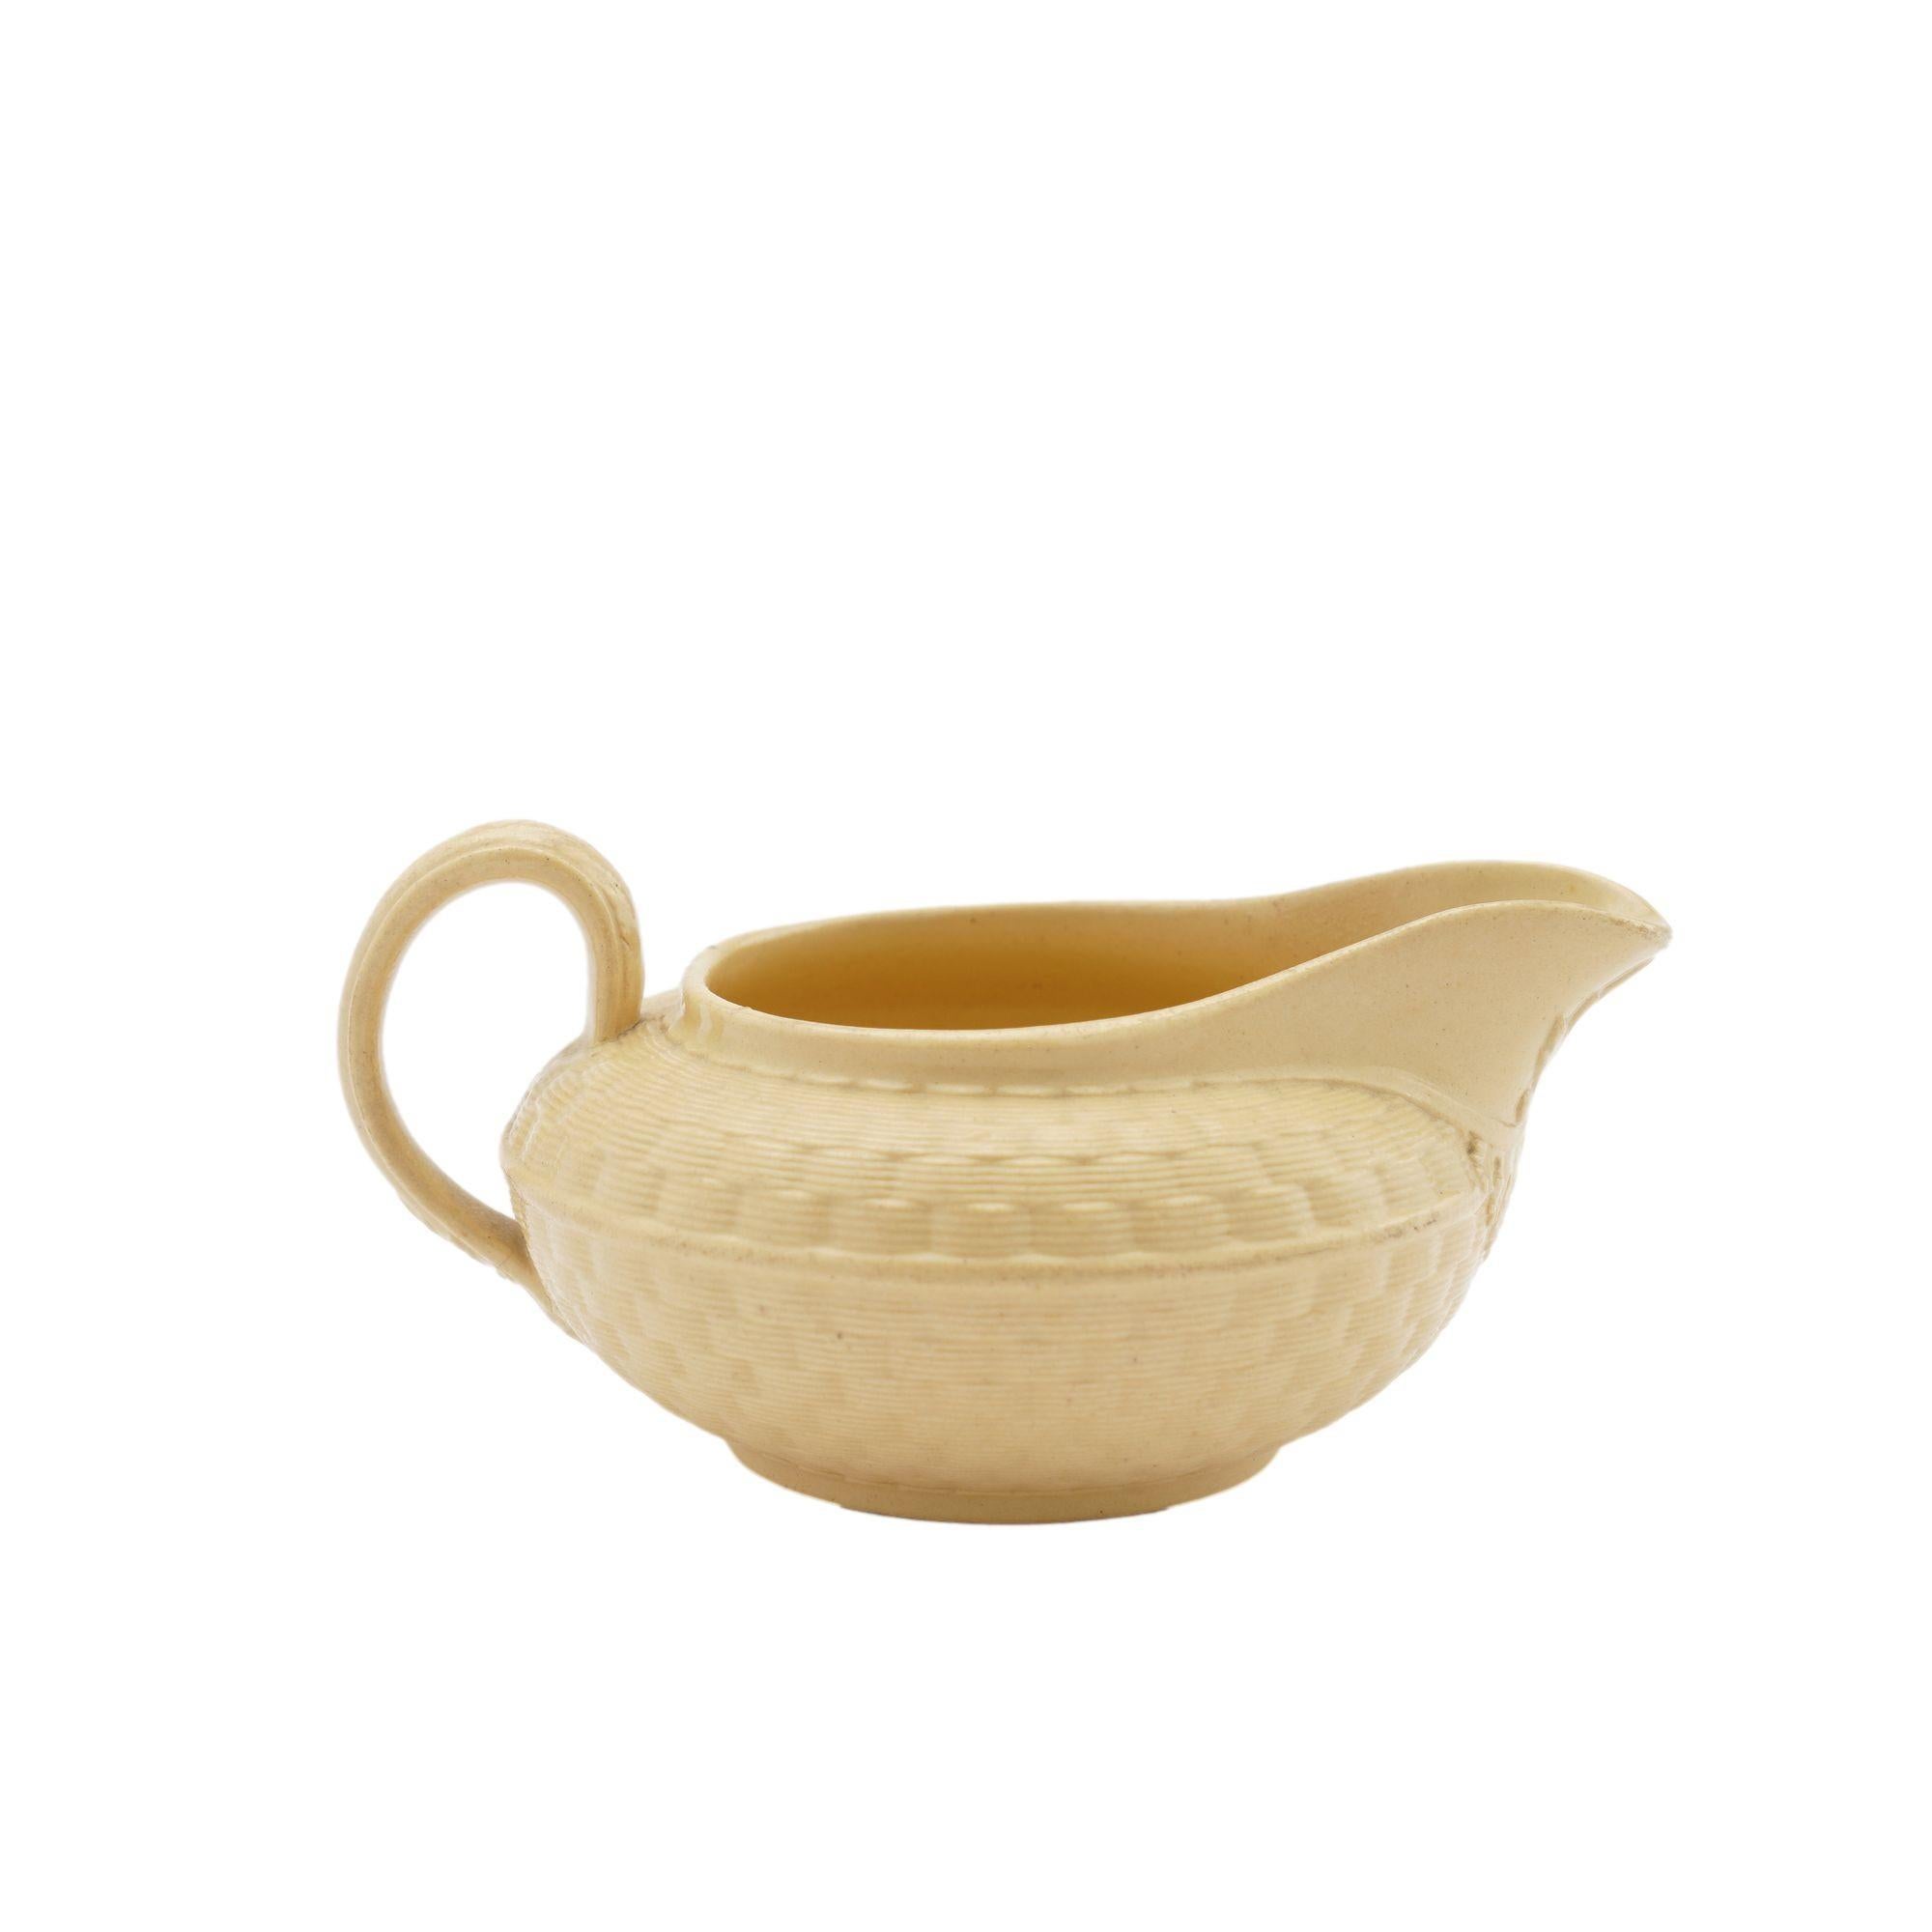 Caneware creamer and teapot by Wedgwood, c. 1817 For Sale 9